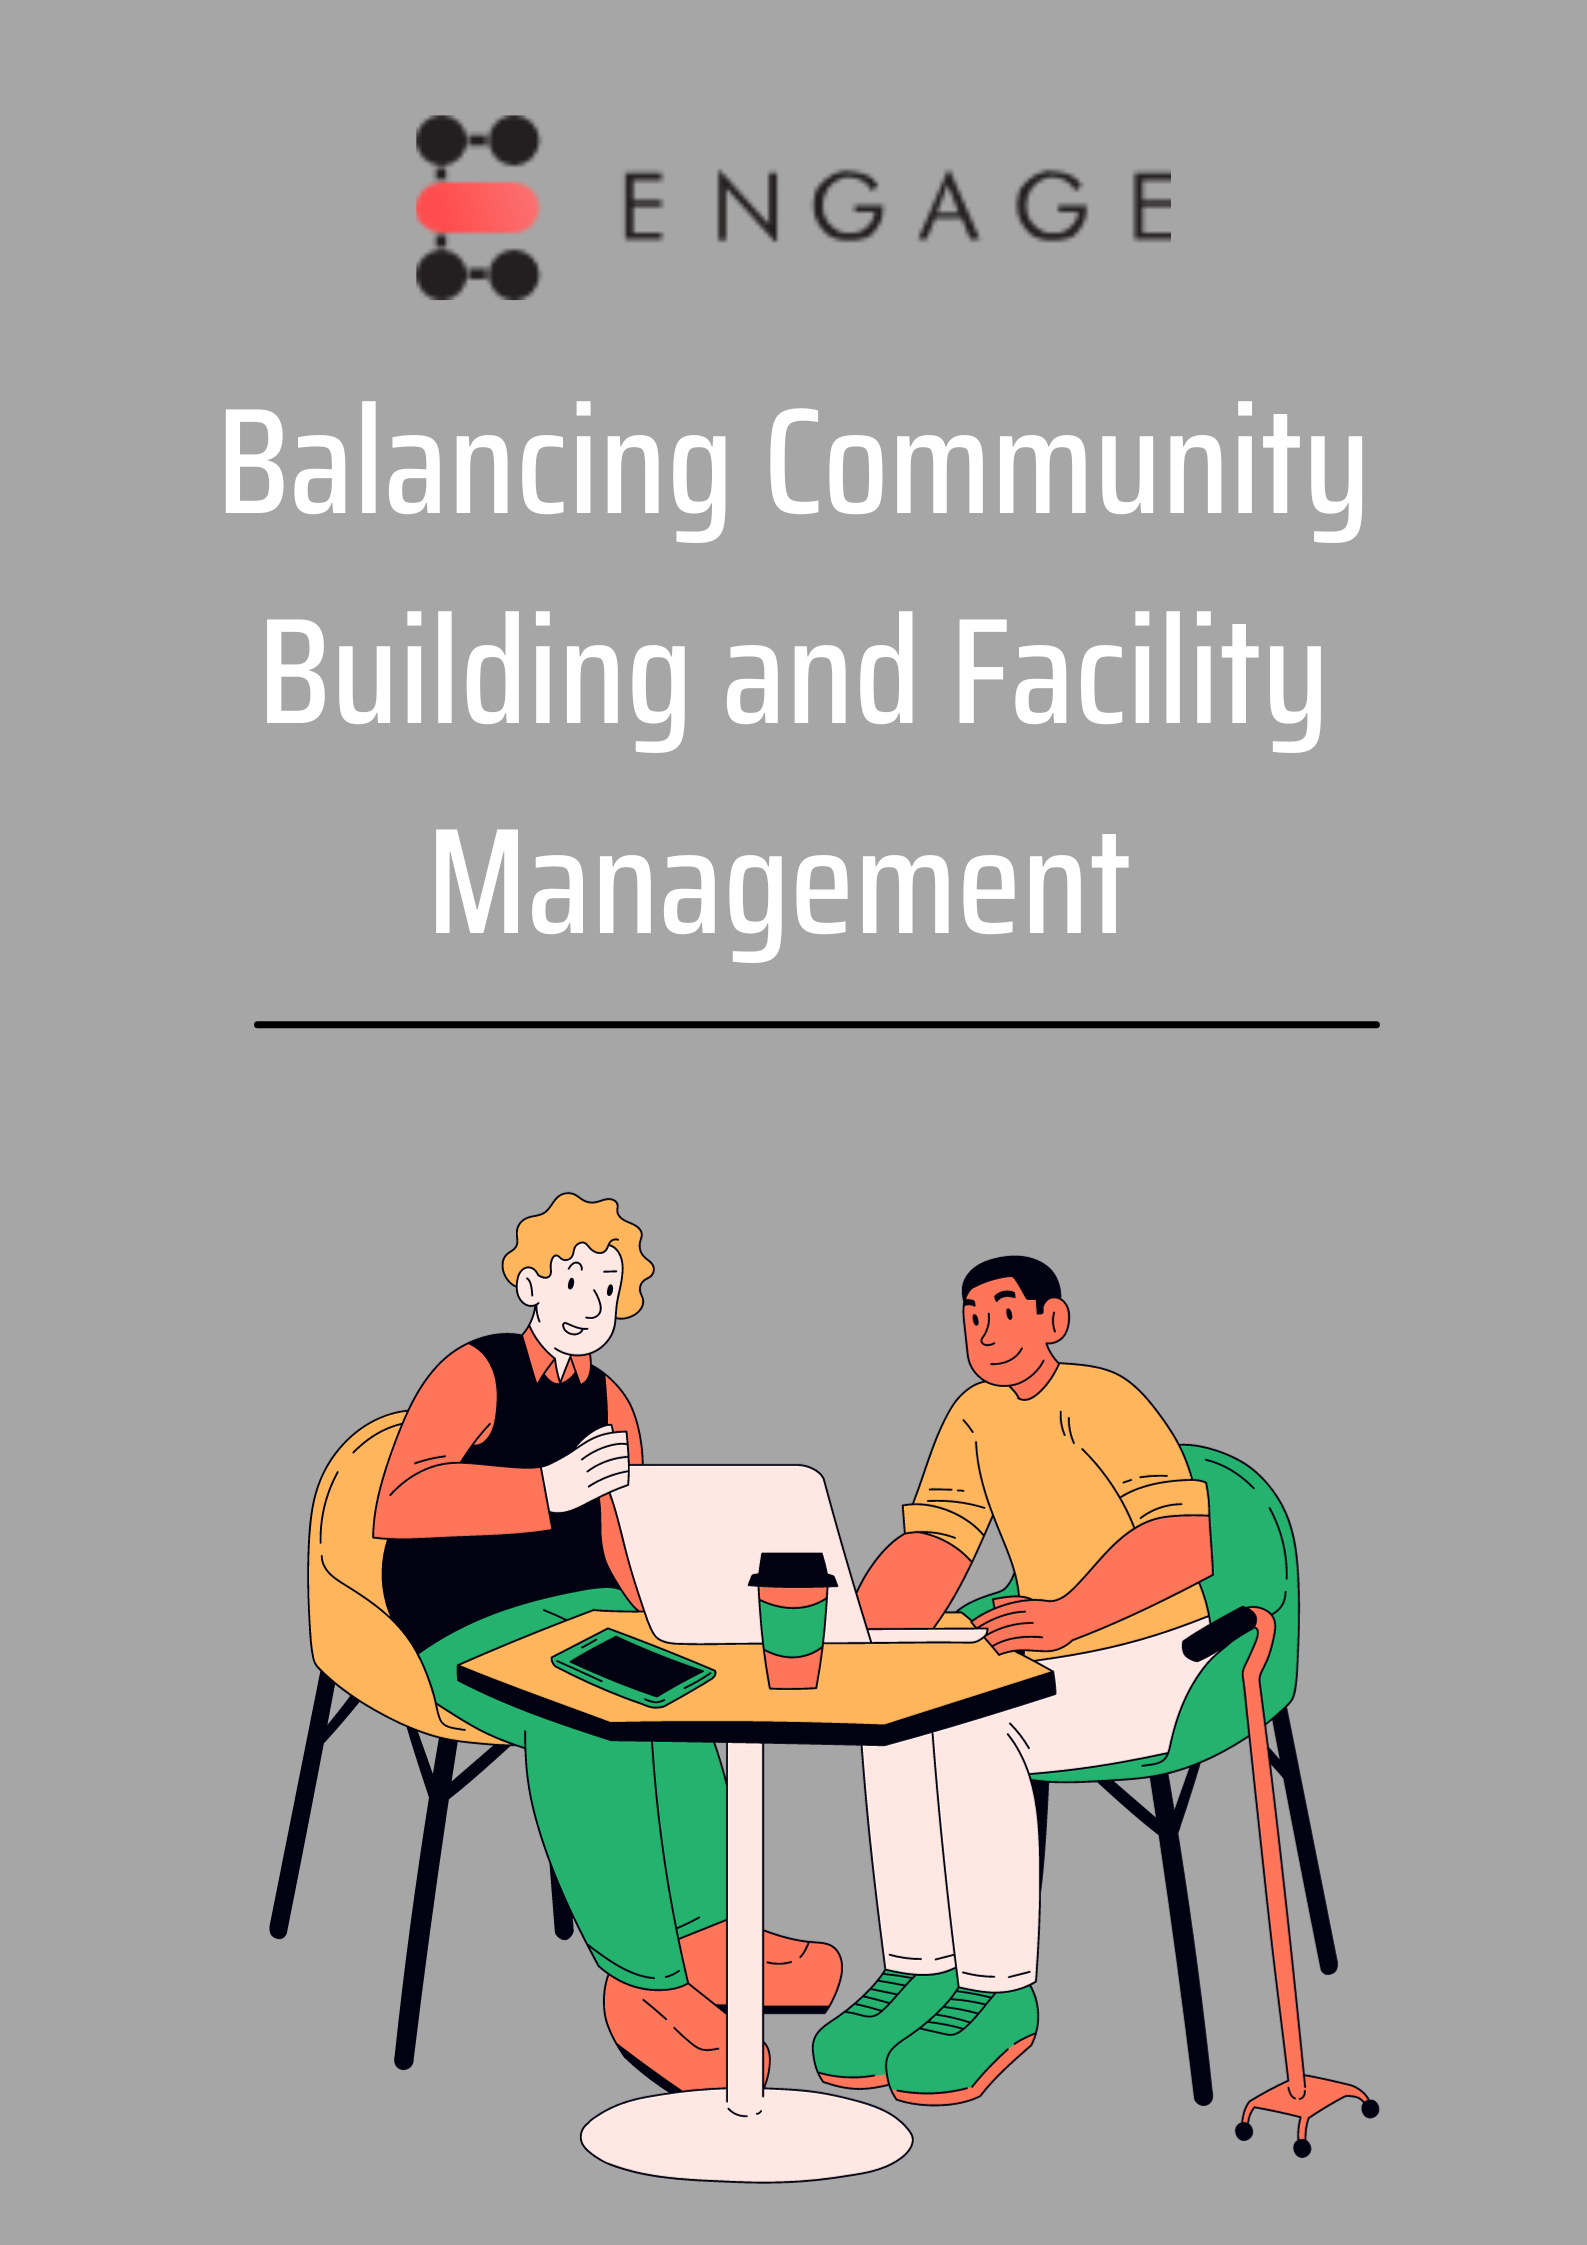 Balancing Community Building and Facility Management